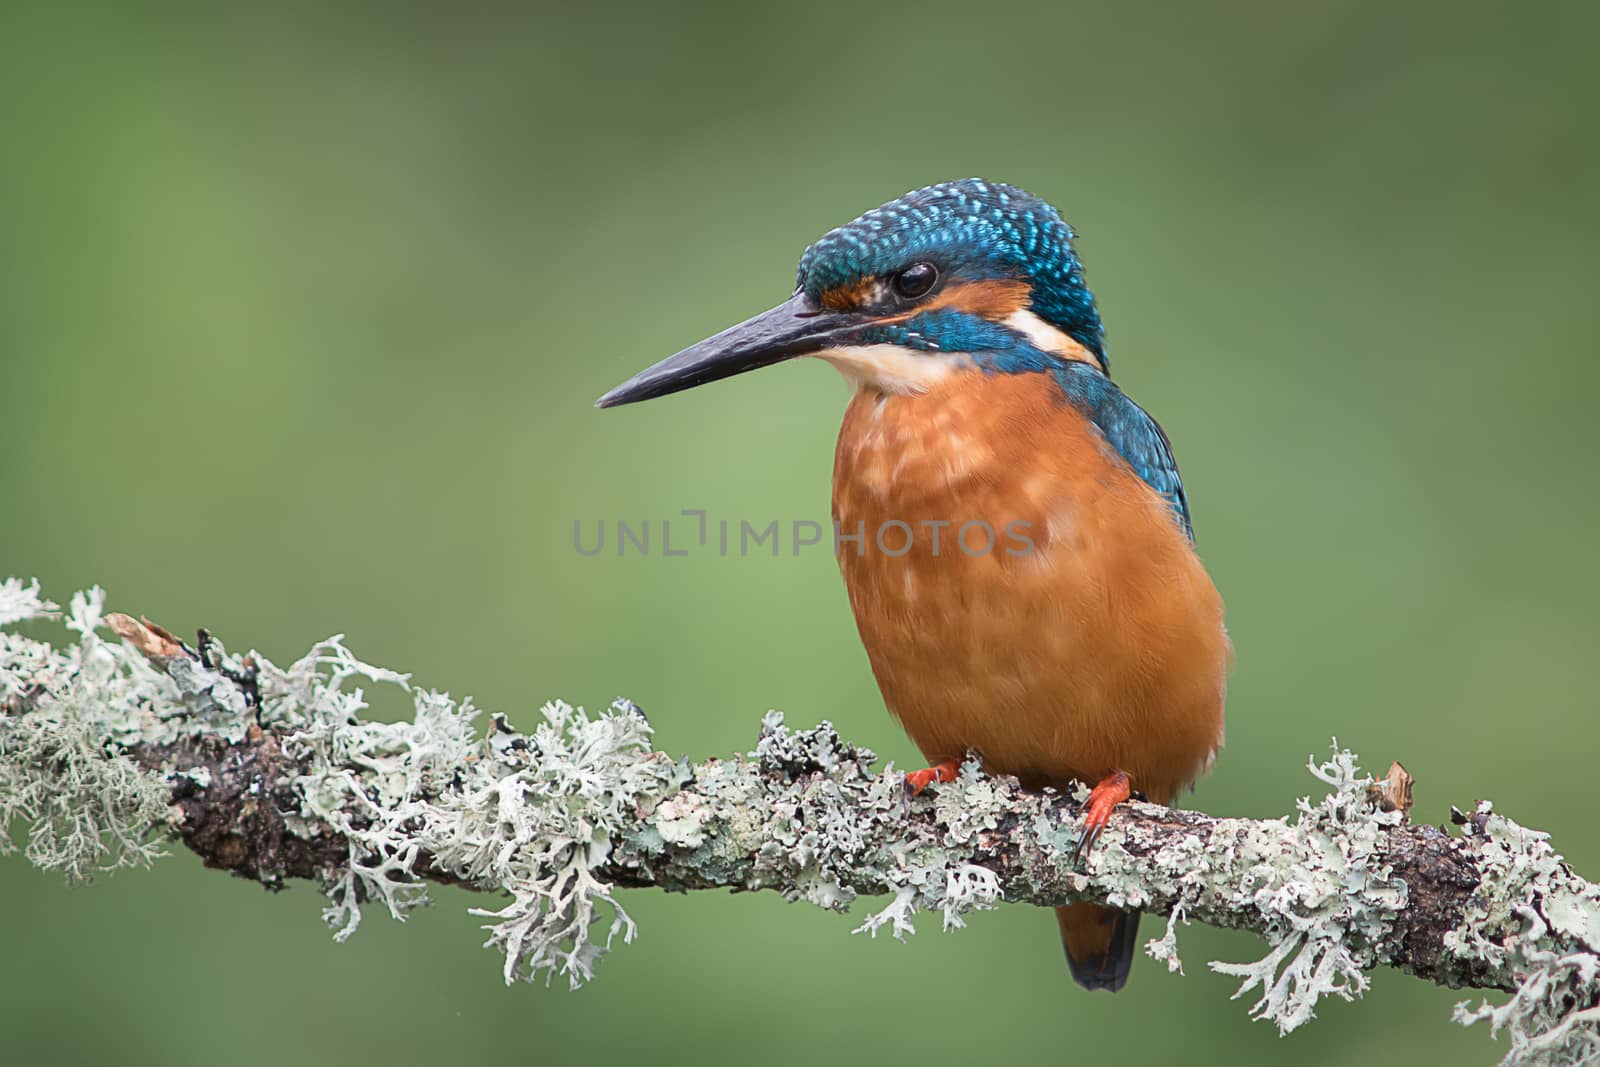 A close up profile portrait of a kingfisher on a branch facing to the left with a natural green background and text space